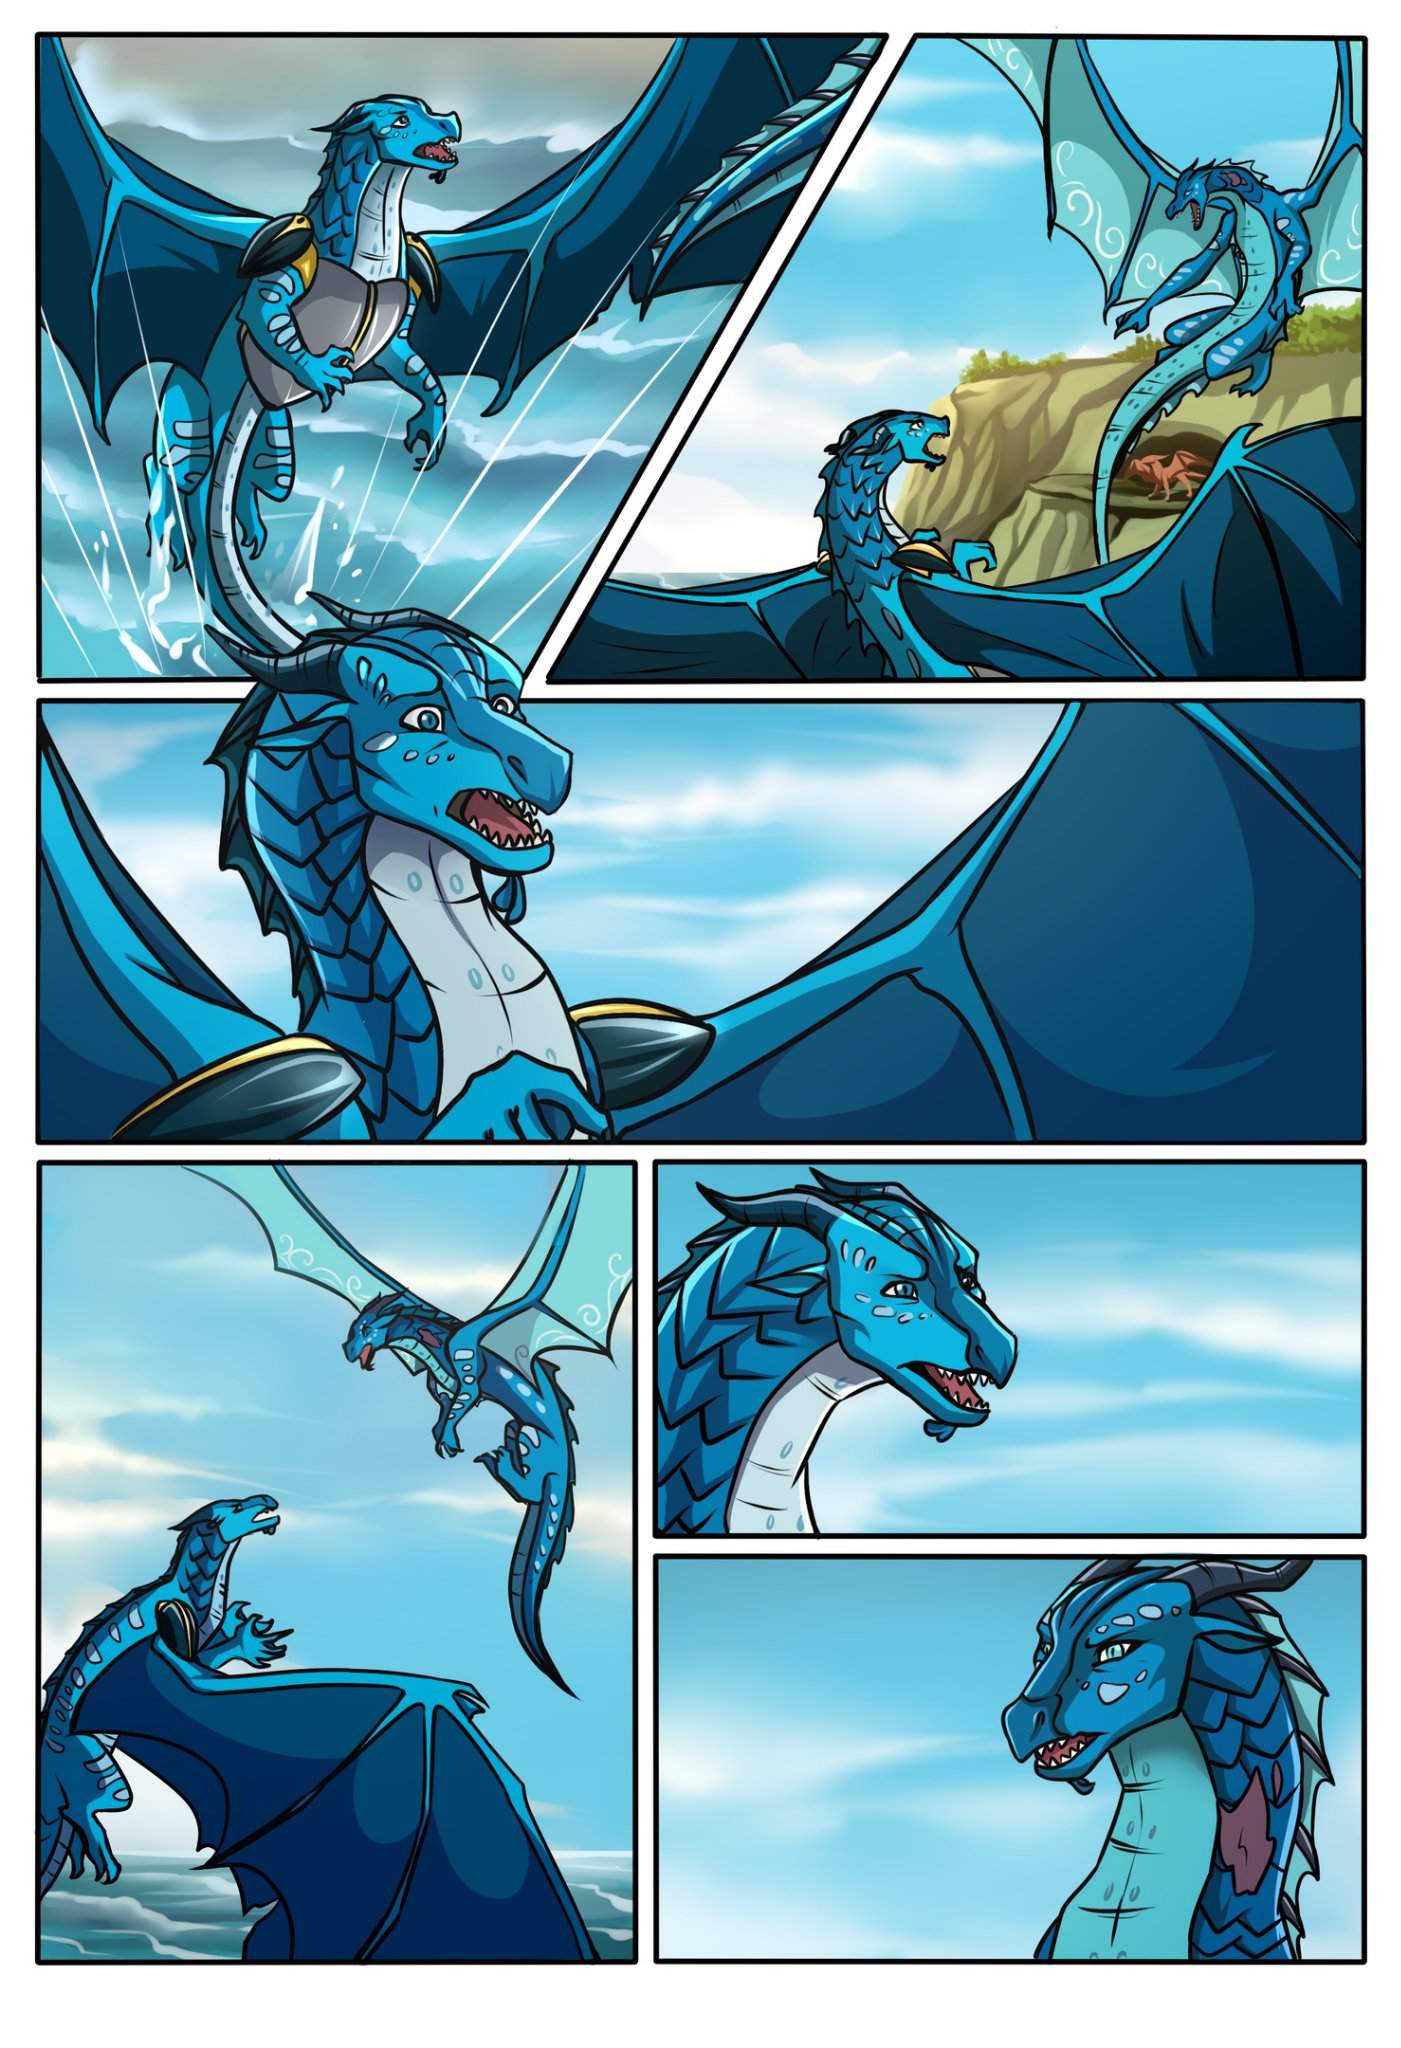 Redraw of the graphic novel page Wings Of Fire Amino.